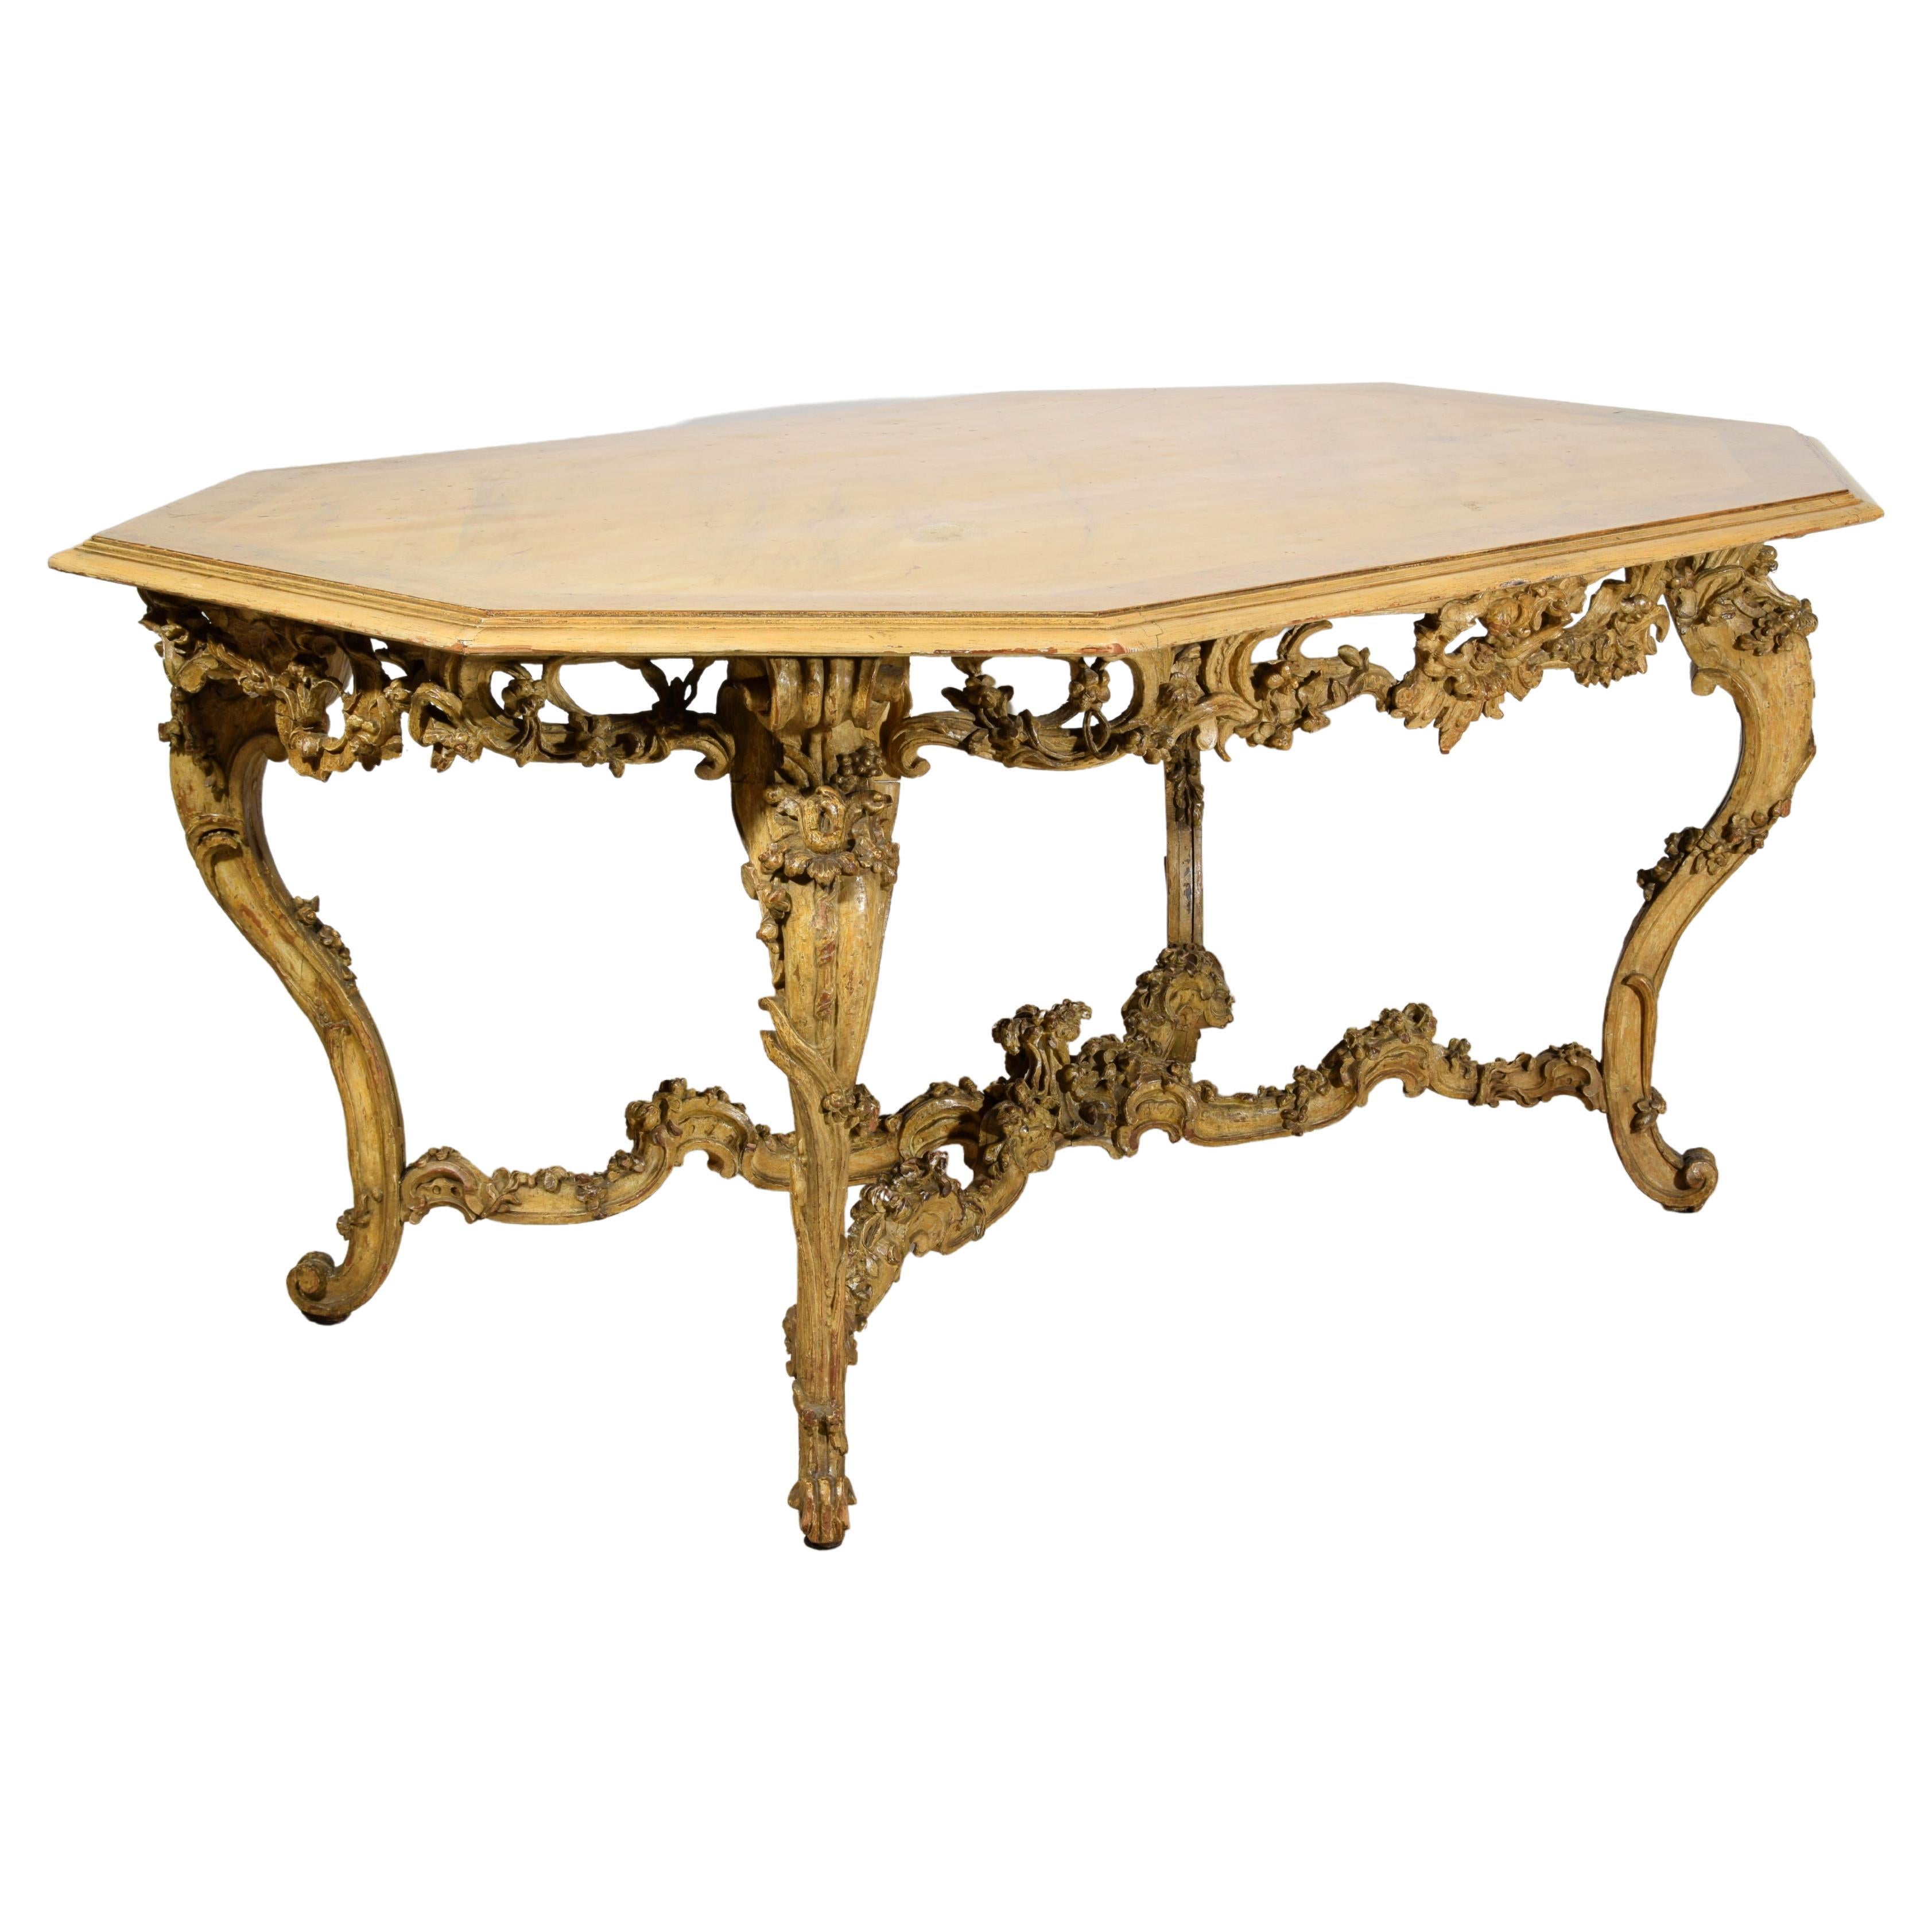 Italian Baroque Carved Gilt and Lacquered Wood Center Table, 18th Century For Sale